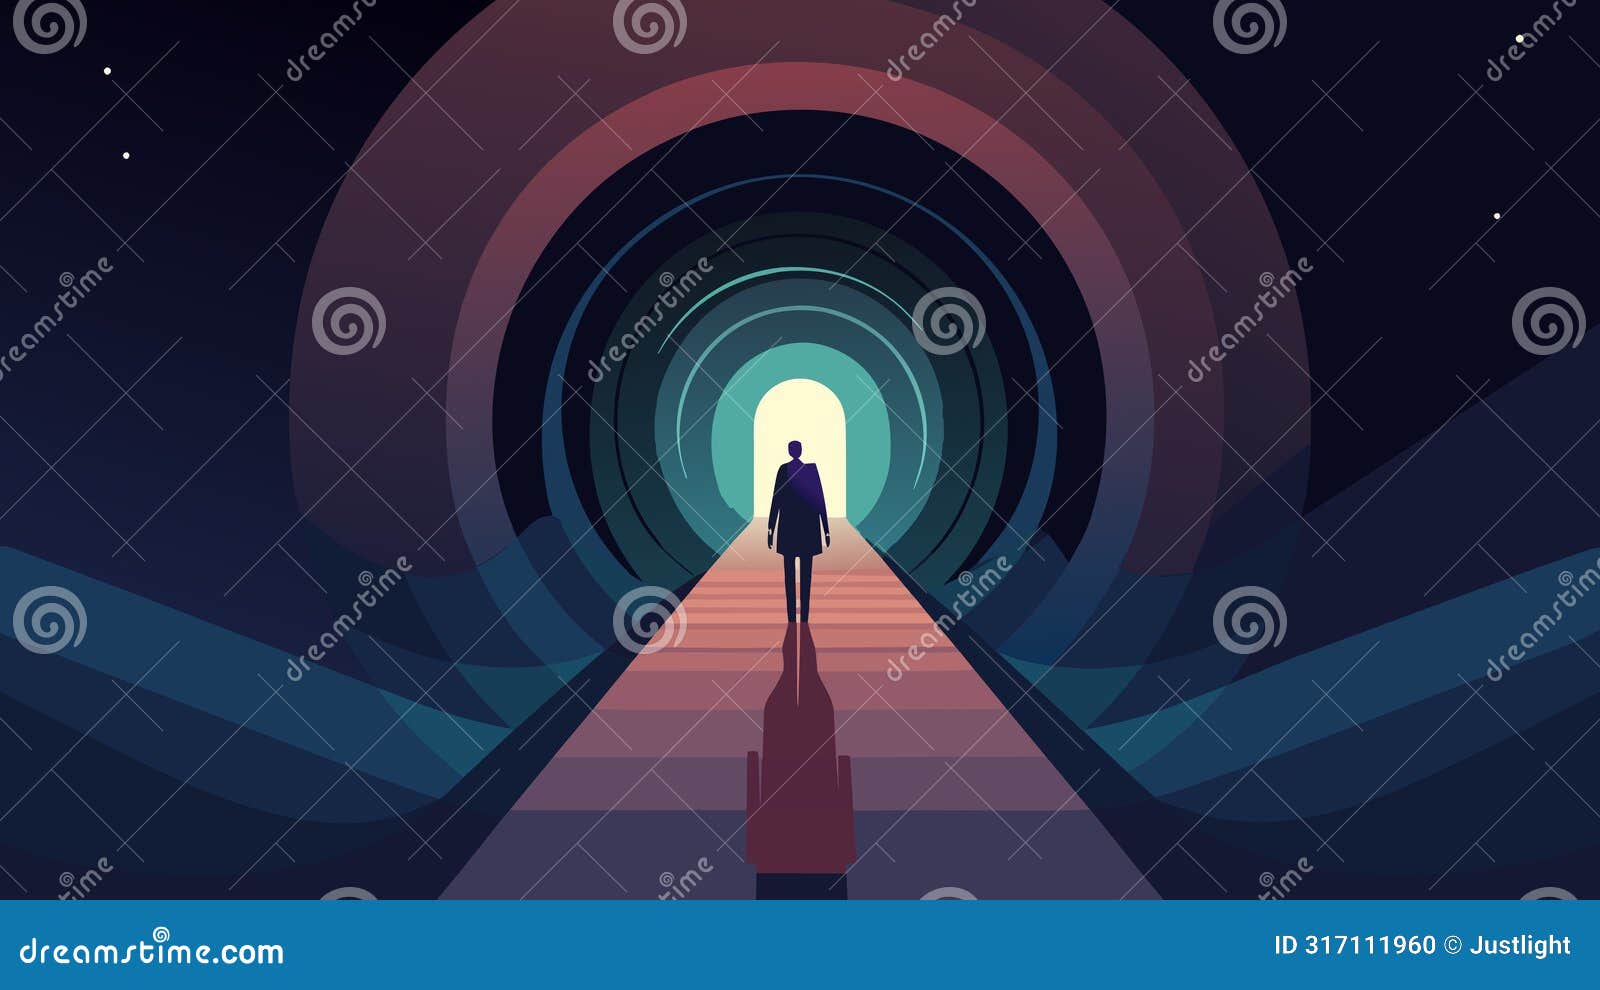 a person standing in a dark tunnel but with a faint glimmer of light at the end representing the stoic belief in finding